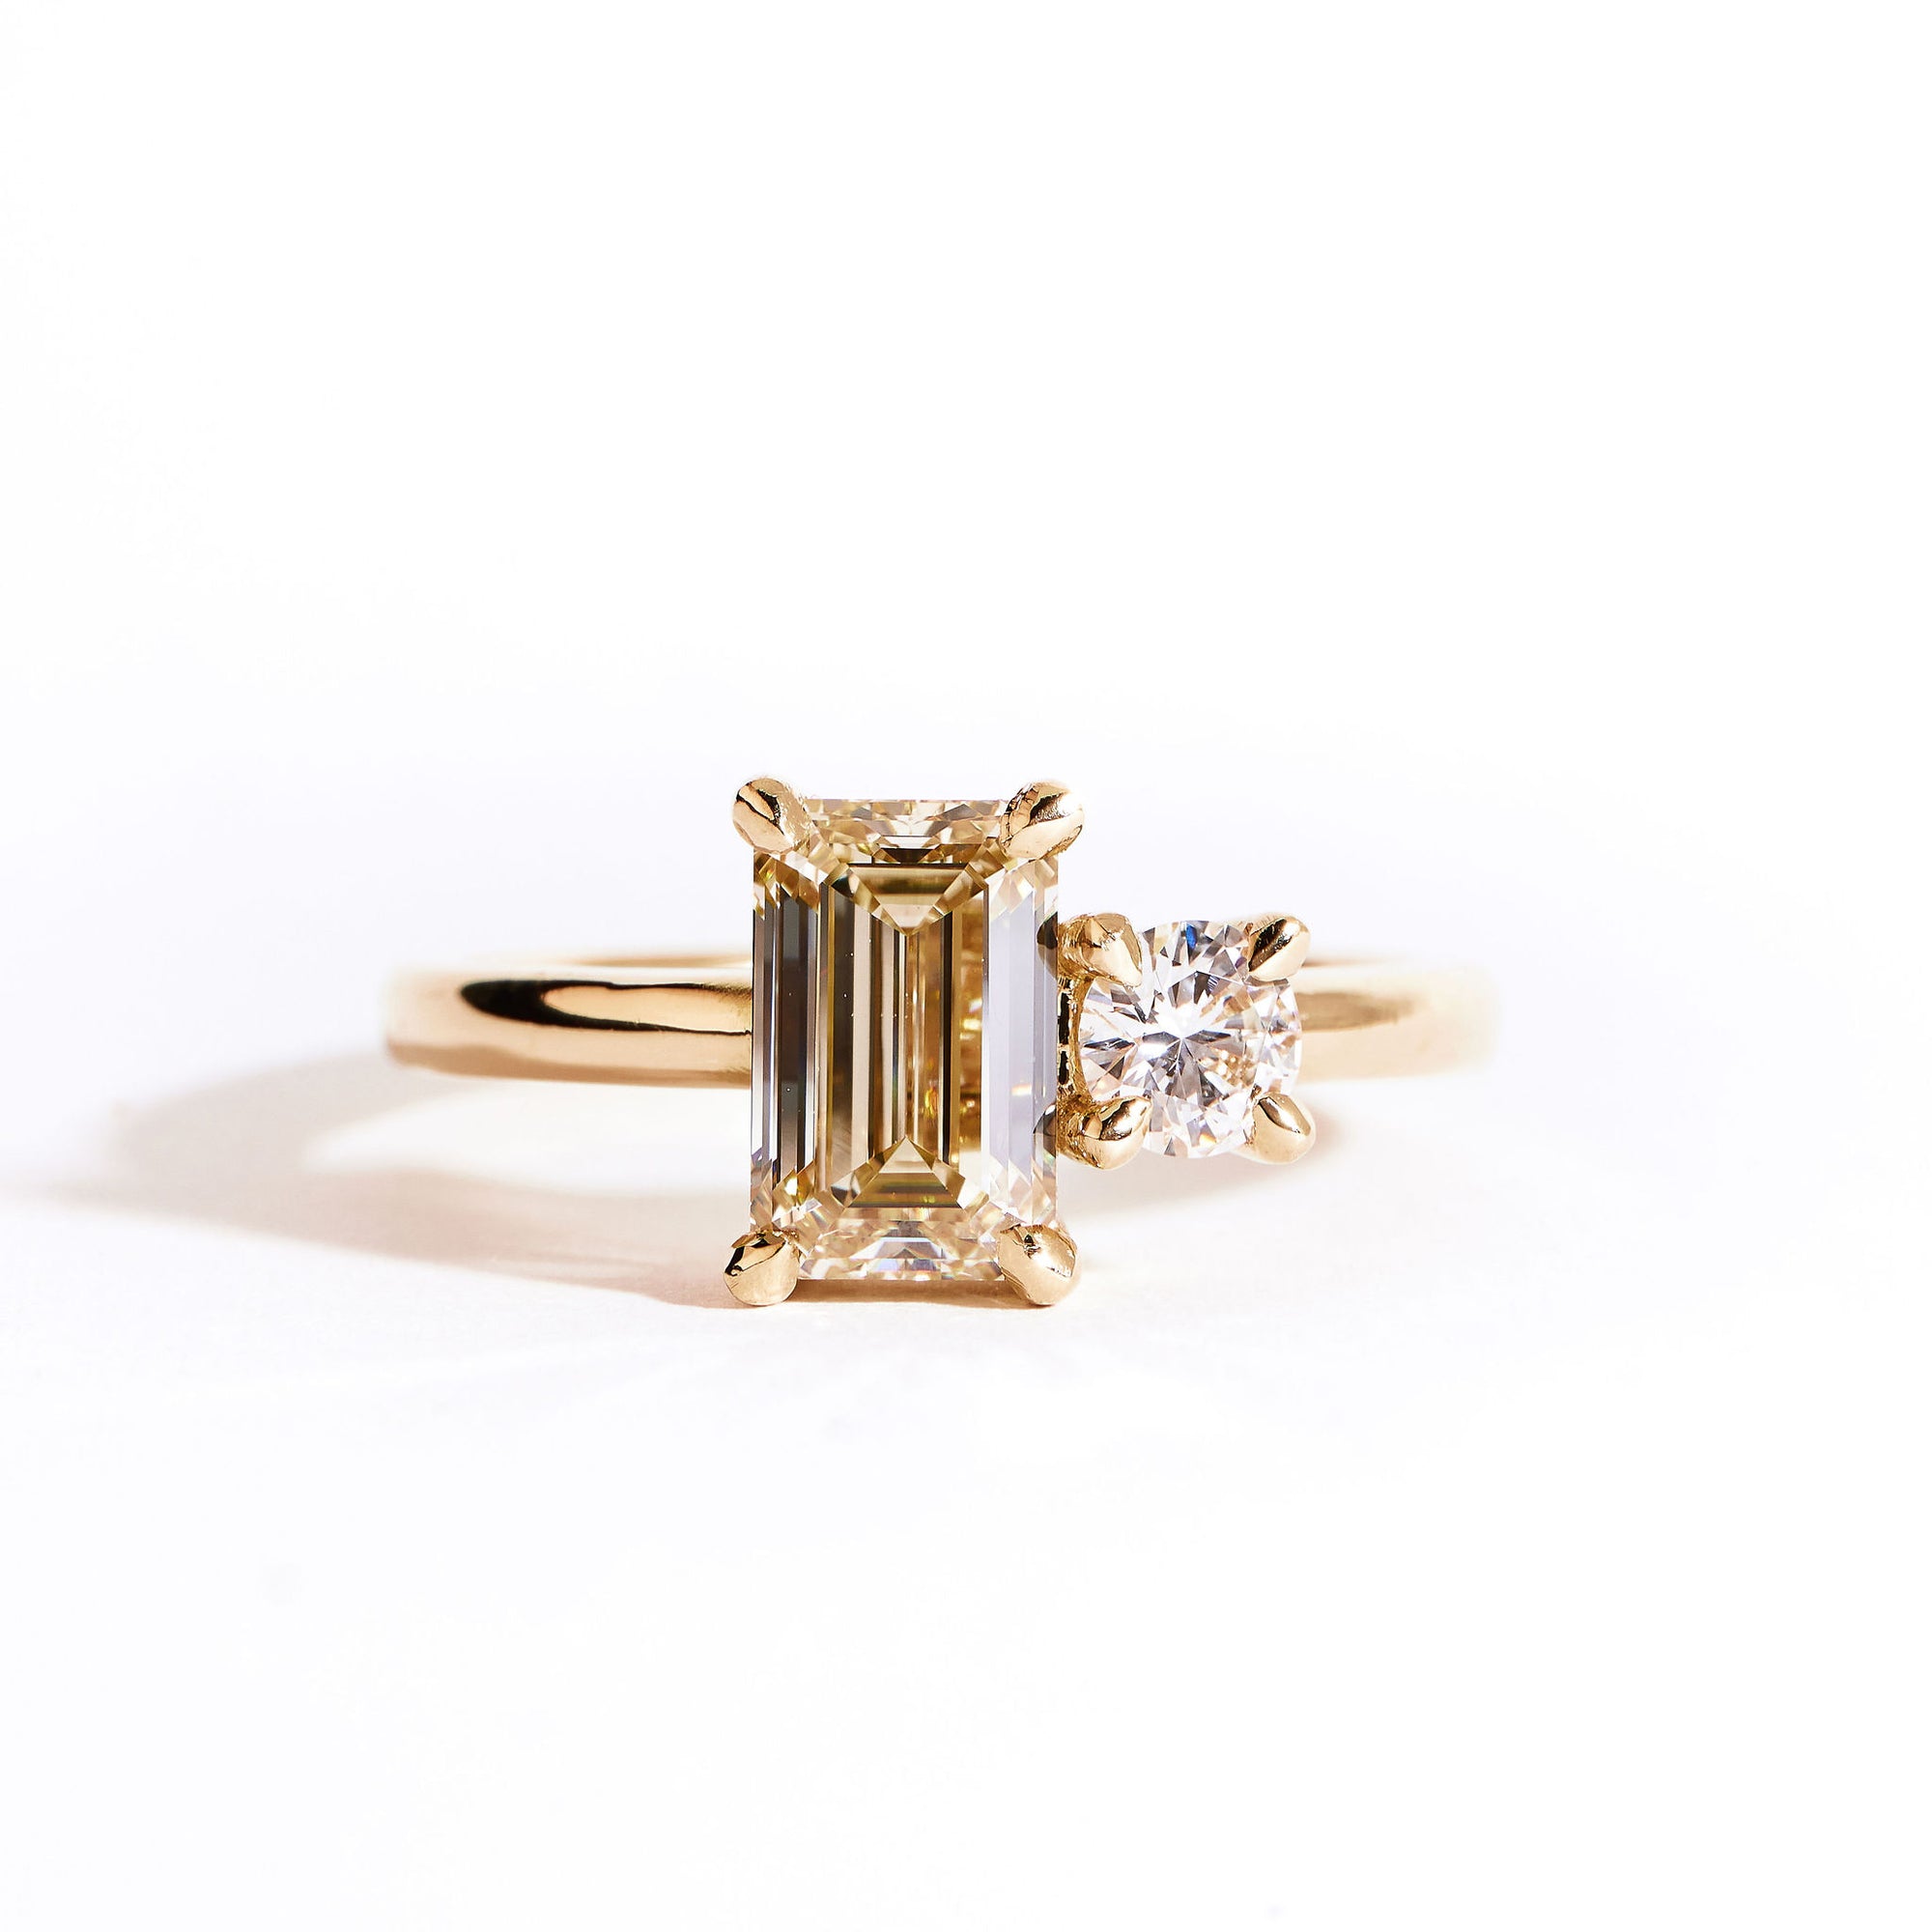 18 carat yellow gold ‘Toi et Moi’ ring, featuring one emerald cut yellow diamond, and one round white diamond.  